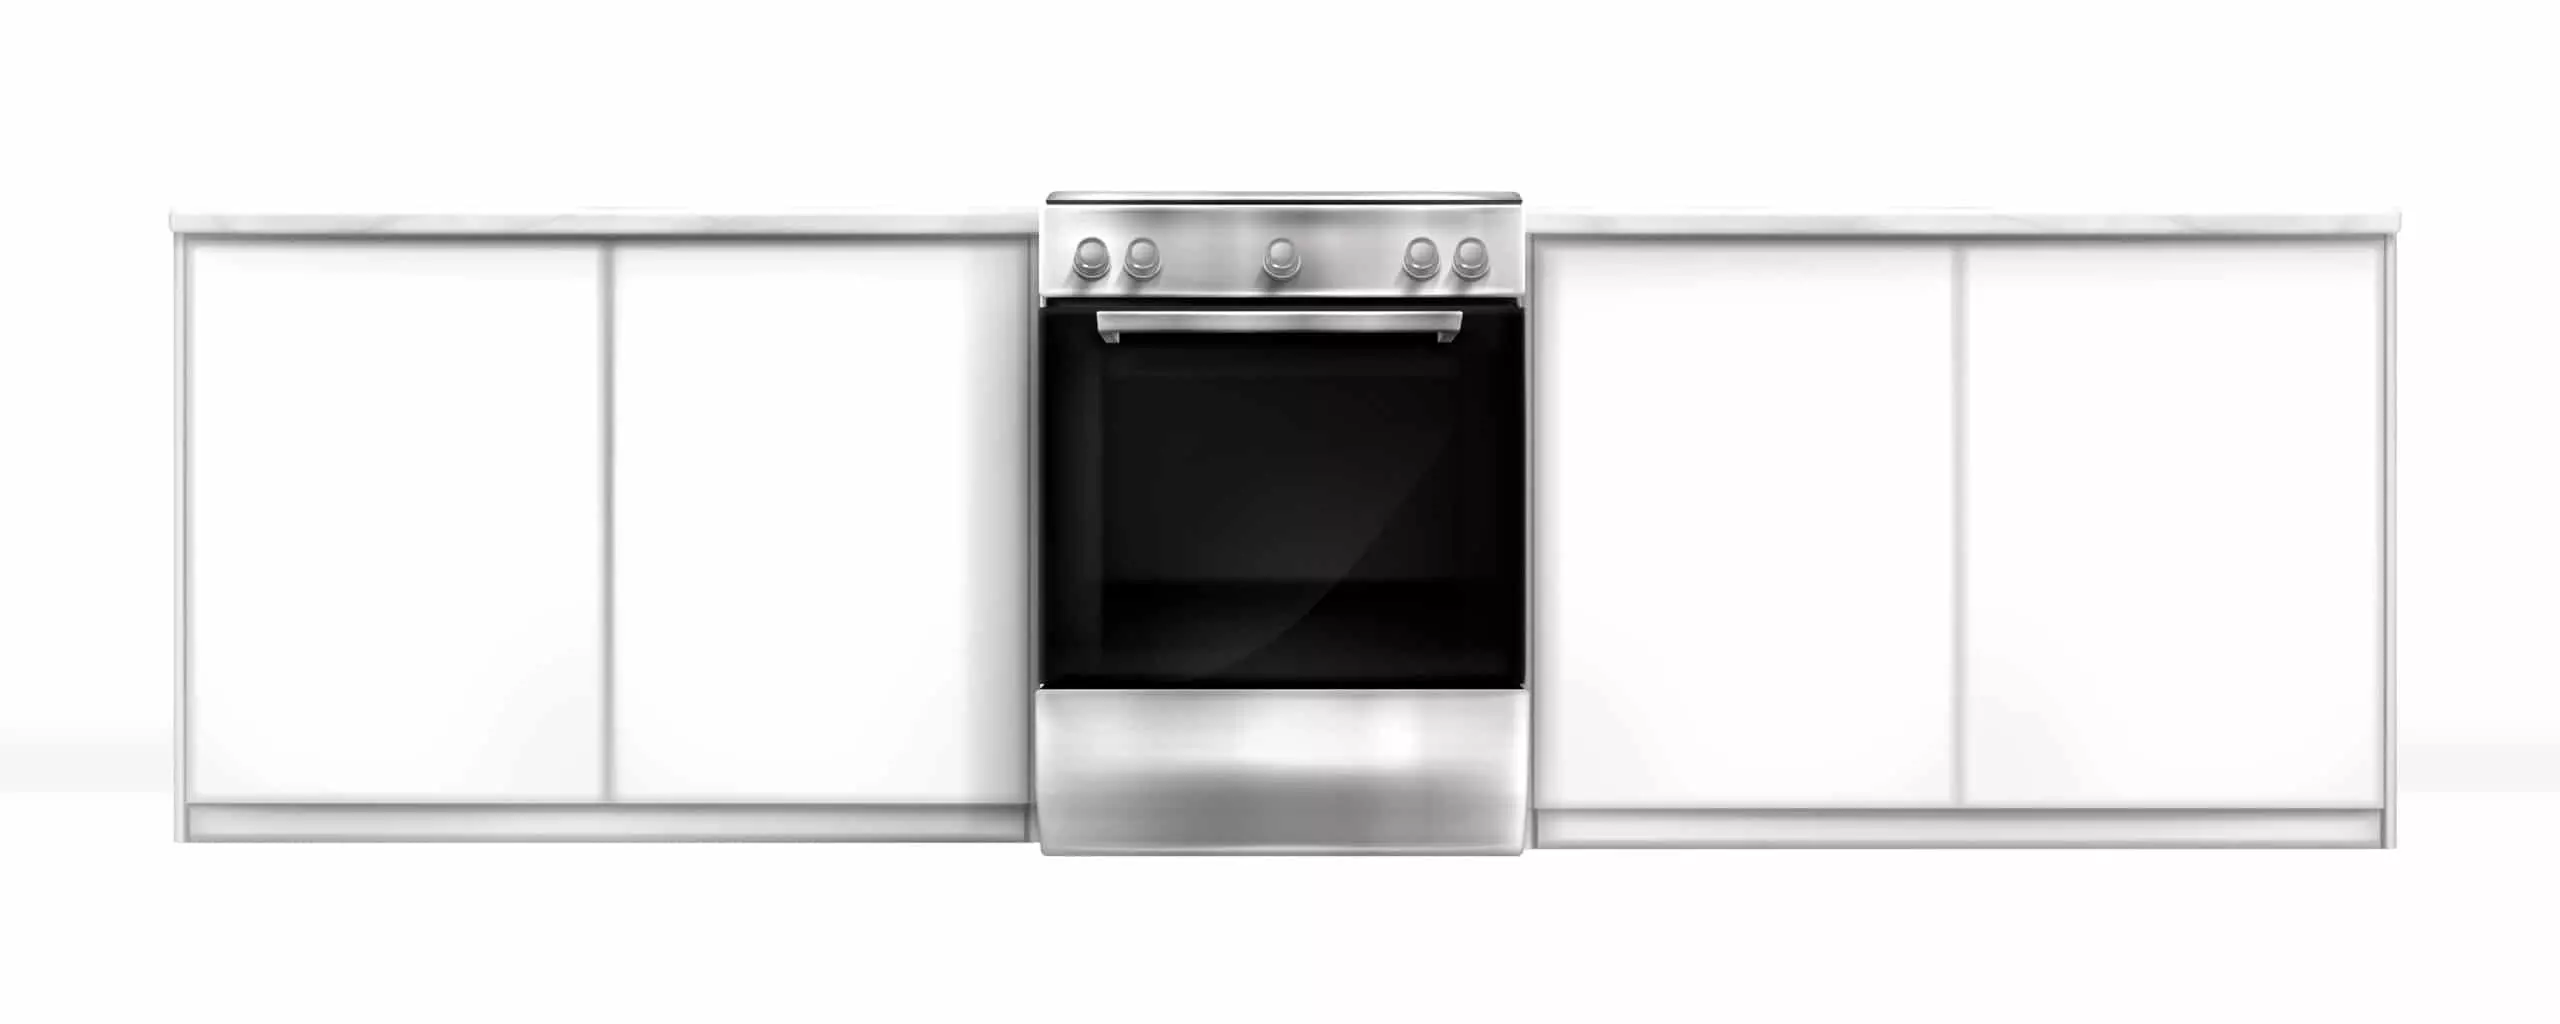 Best Electric Cookers in the UK in 2021